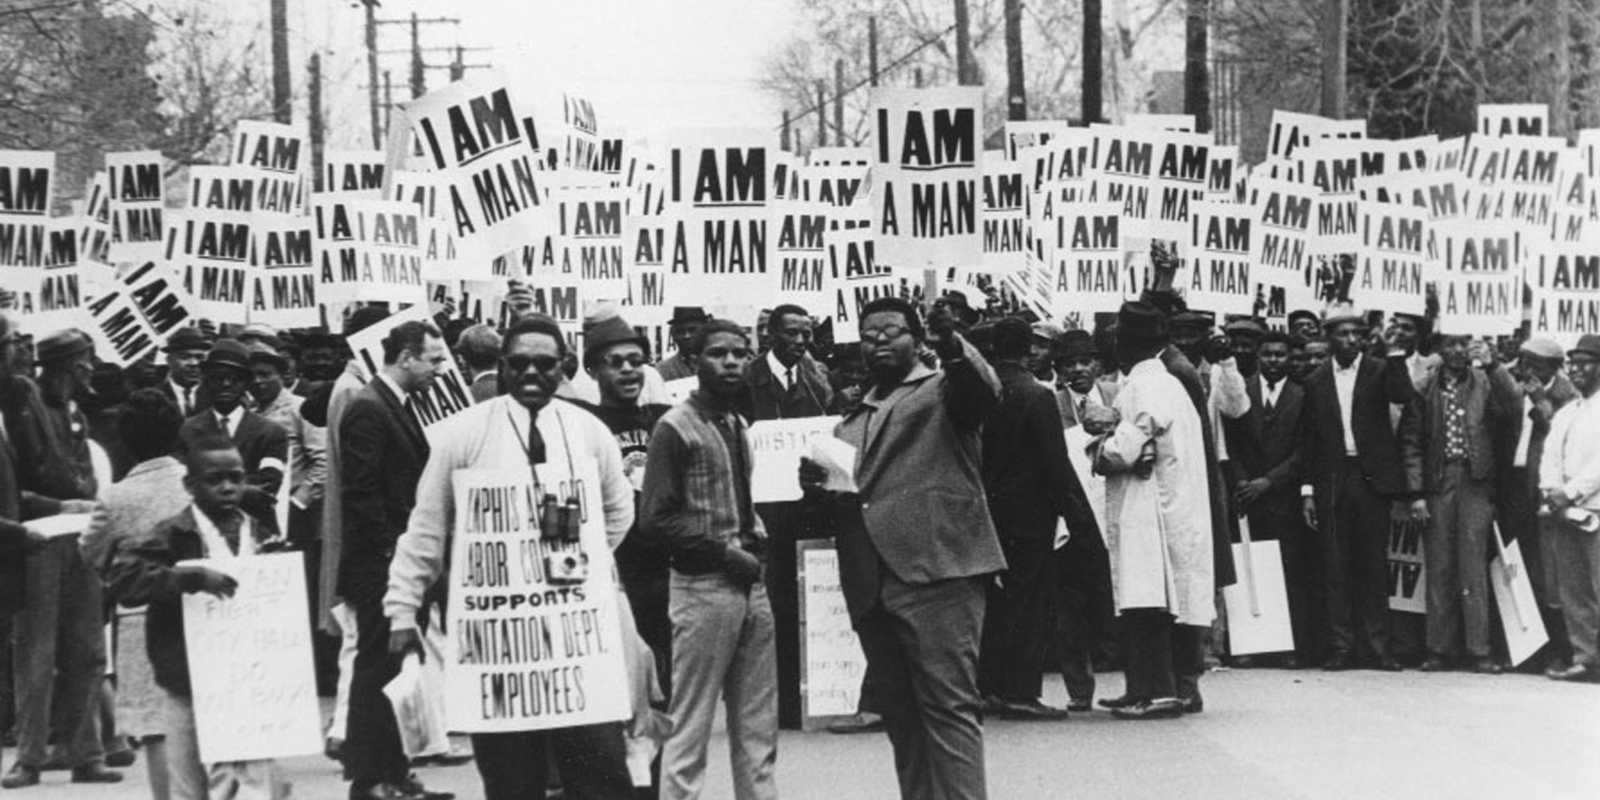 Third episode of the I AM Story podcast focuses on Dr. King 